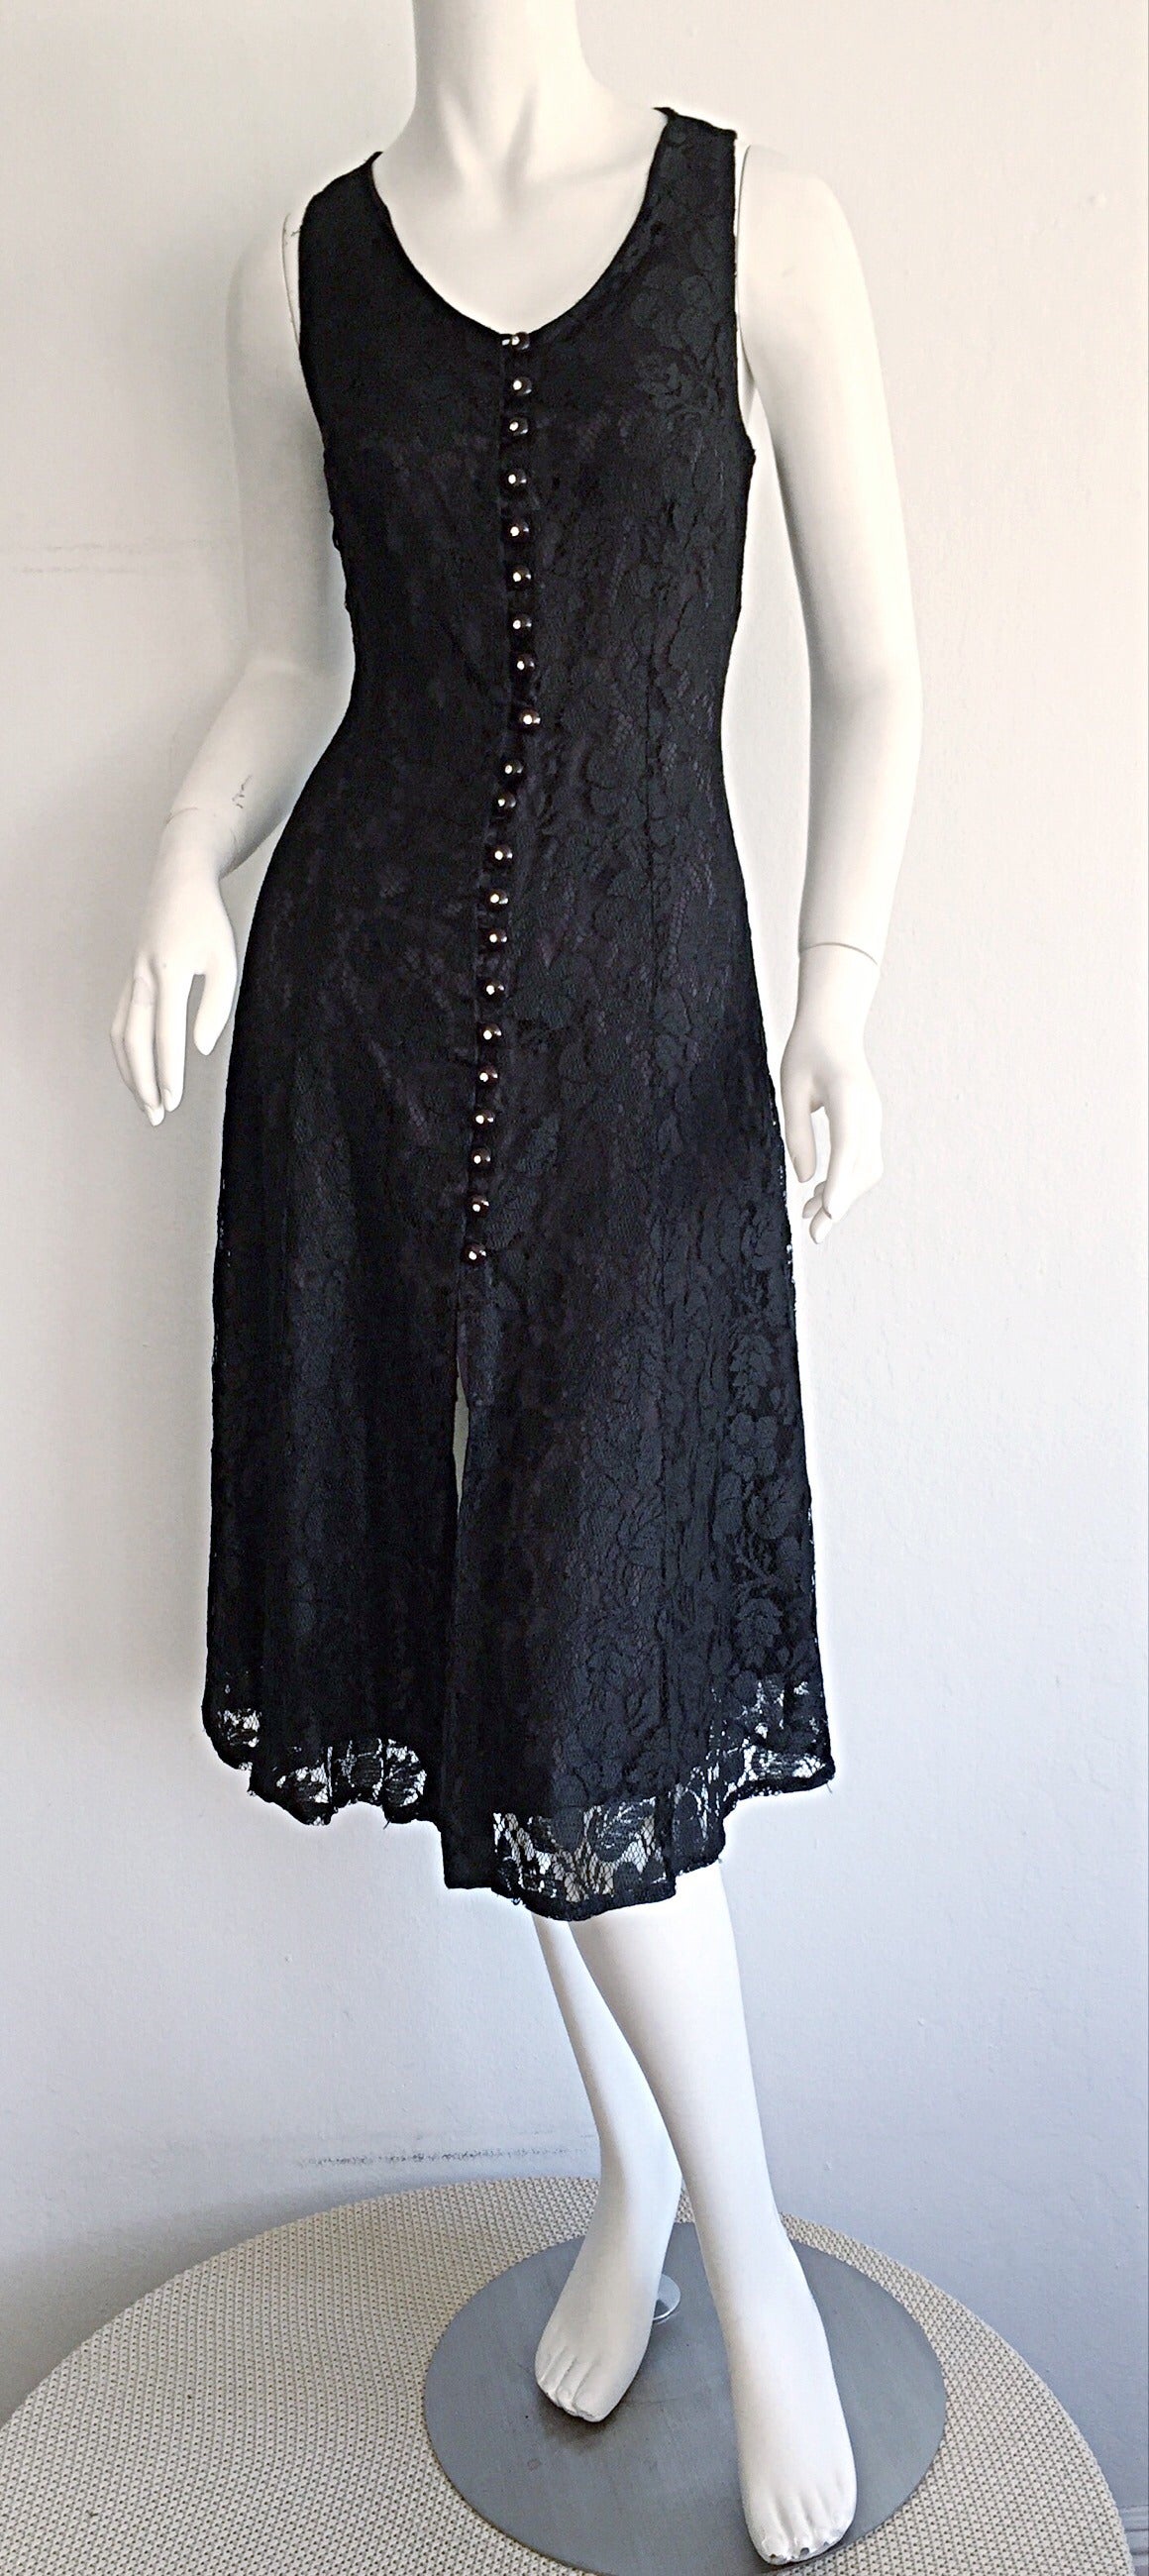 Beautiful 1990s black Paco Rabbane lace dress! Features functional black buttons, with rhinestones up the front. Tie at back to control desired fit. Fully lined. In great condition. A flirty number that will be your new go-to little black dress!